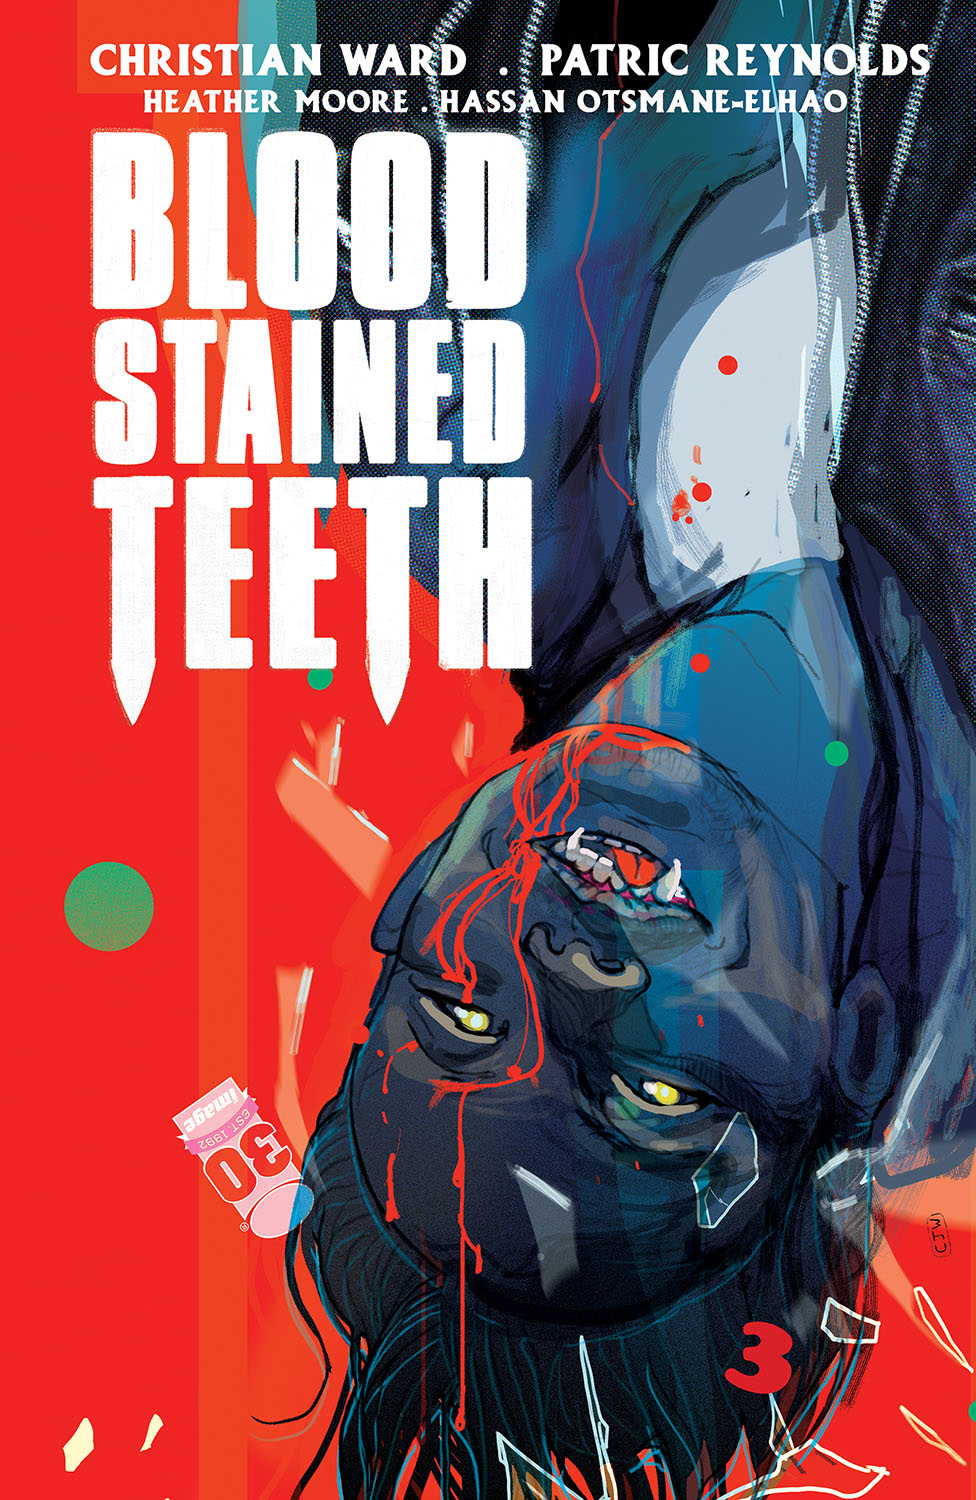 Blood-Stained Teeth #3 Cover A Ward (Mature)